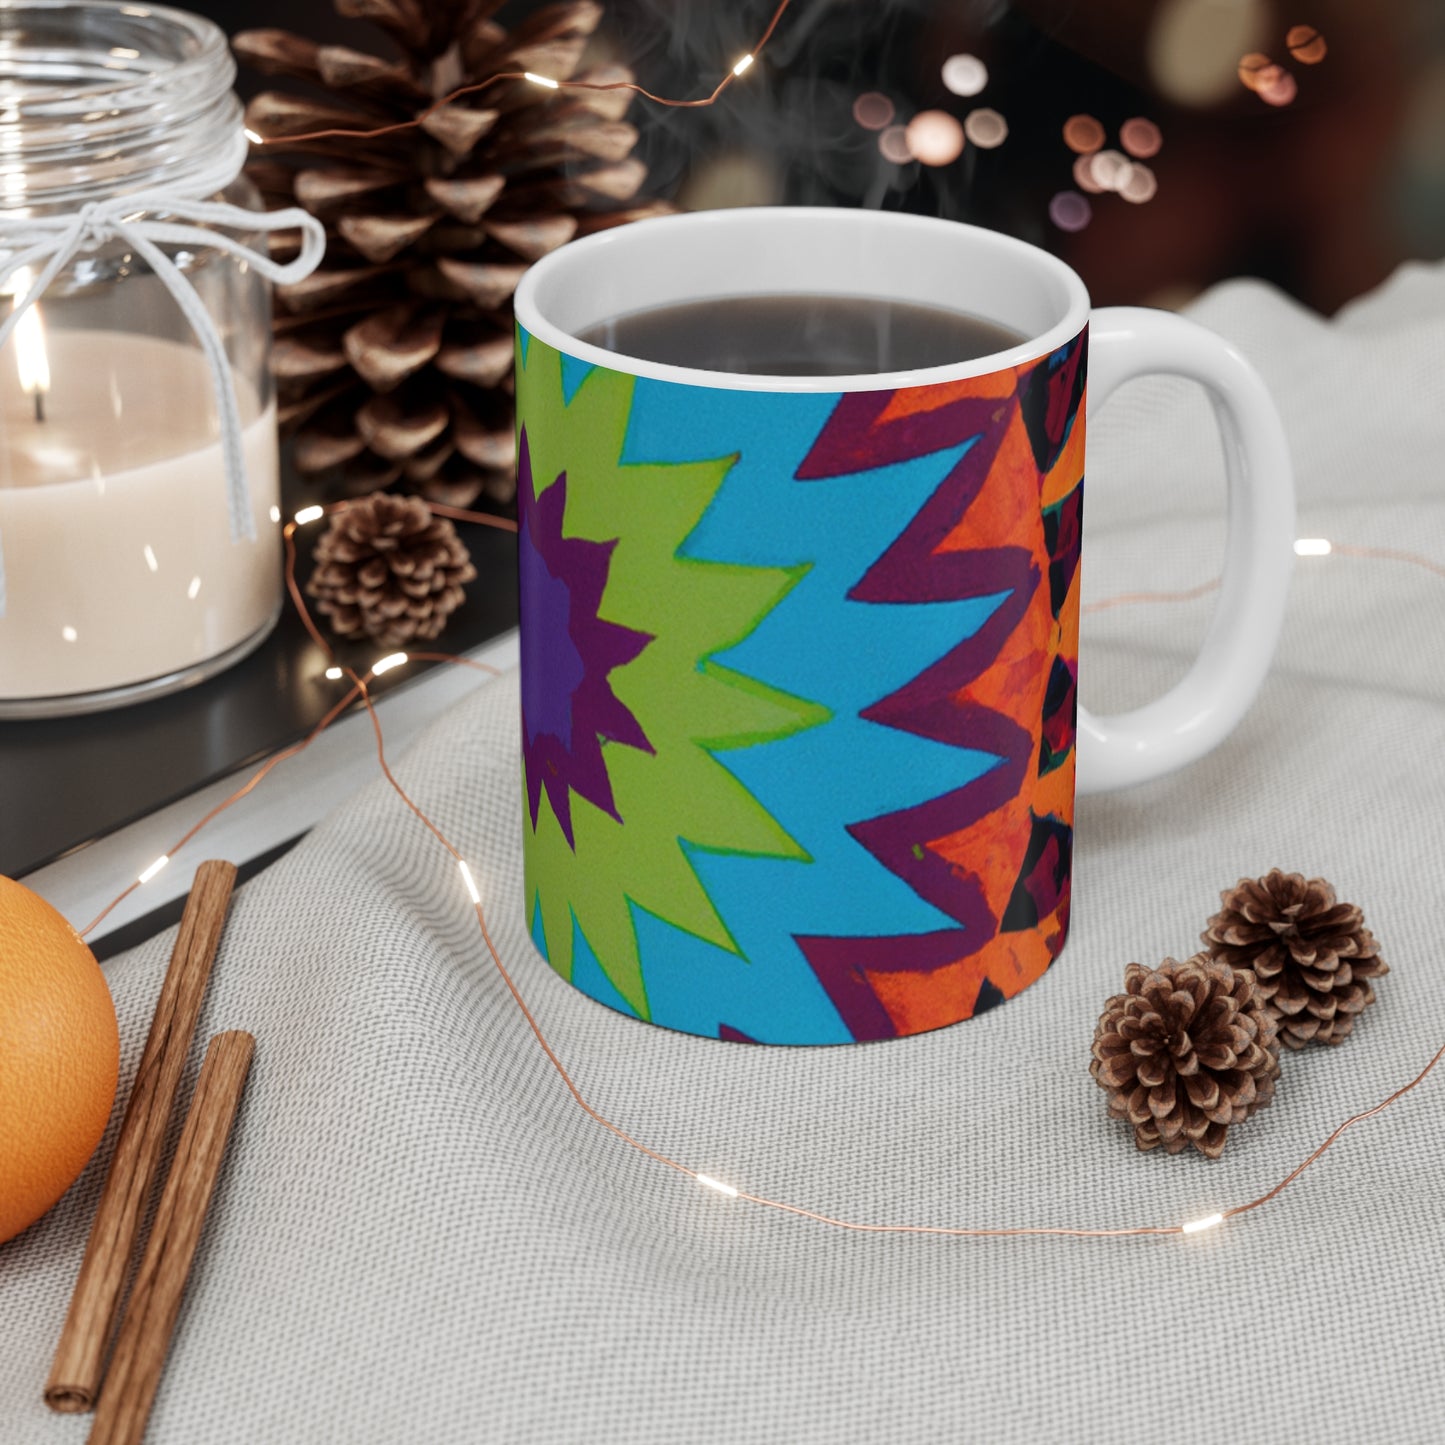 Ozzie's Java - Psychedelic Coffee Cup Mug 11 Ounce